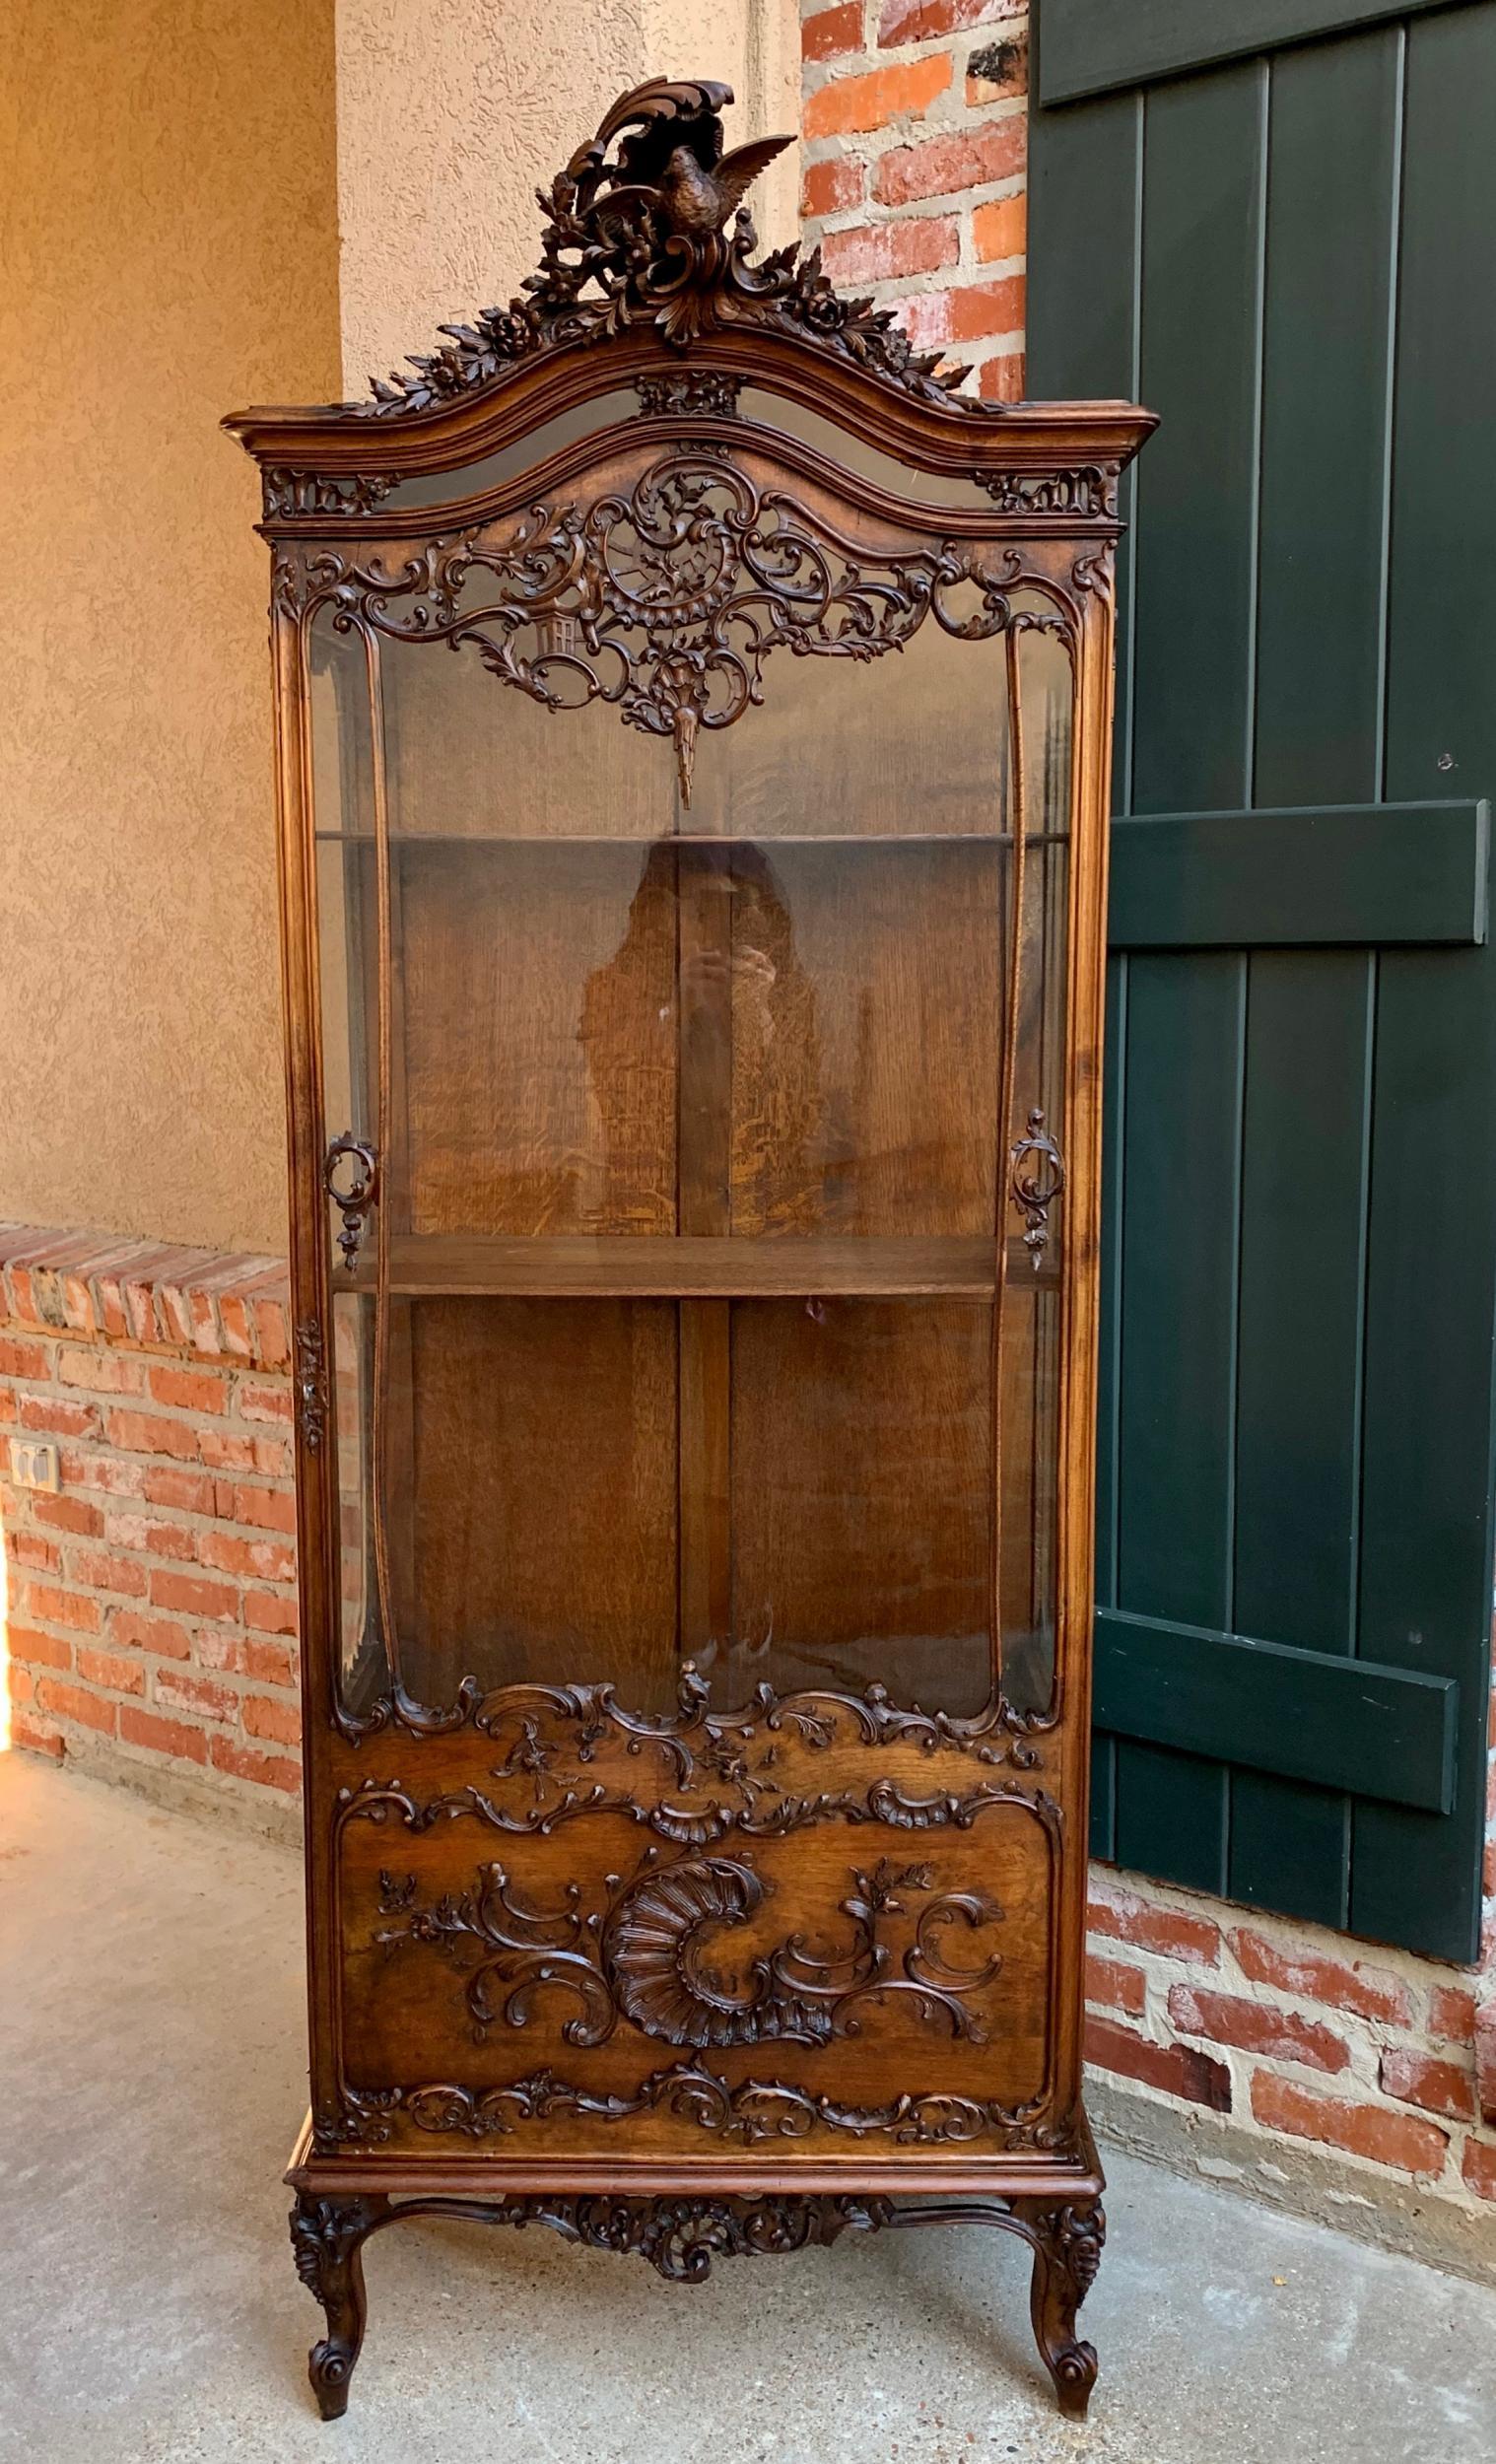 19th century French carved oak glass vitrine display cabinet bookcase Louis XV

~ Direct from France
~ Stunning antique French carved display cabinet, with superb Louis XV carved details throughout
~ Upper crown features a bird with outstretched